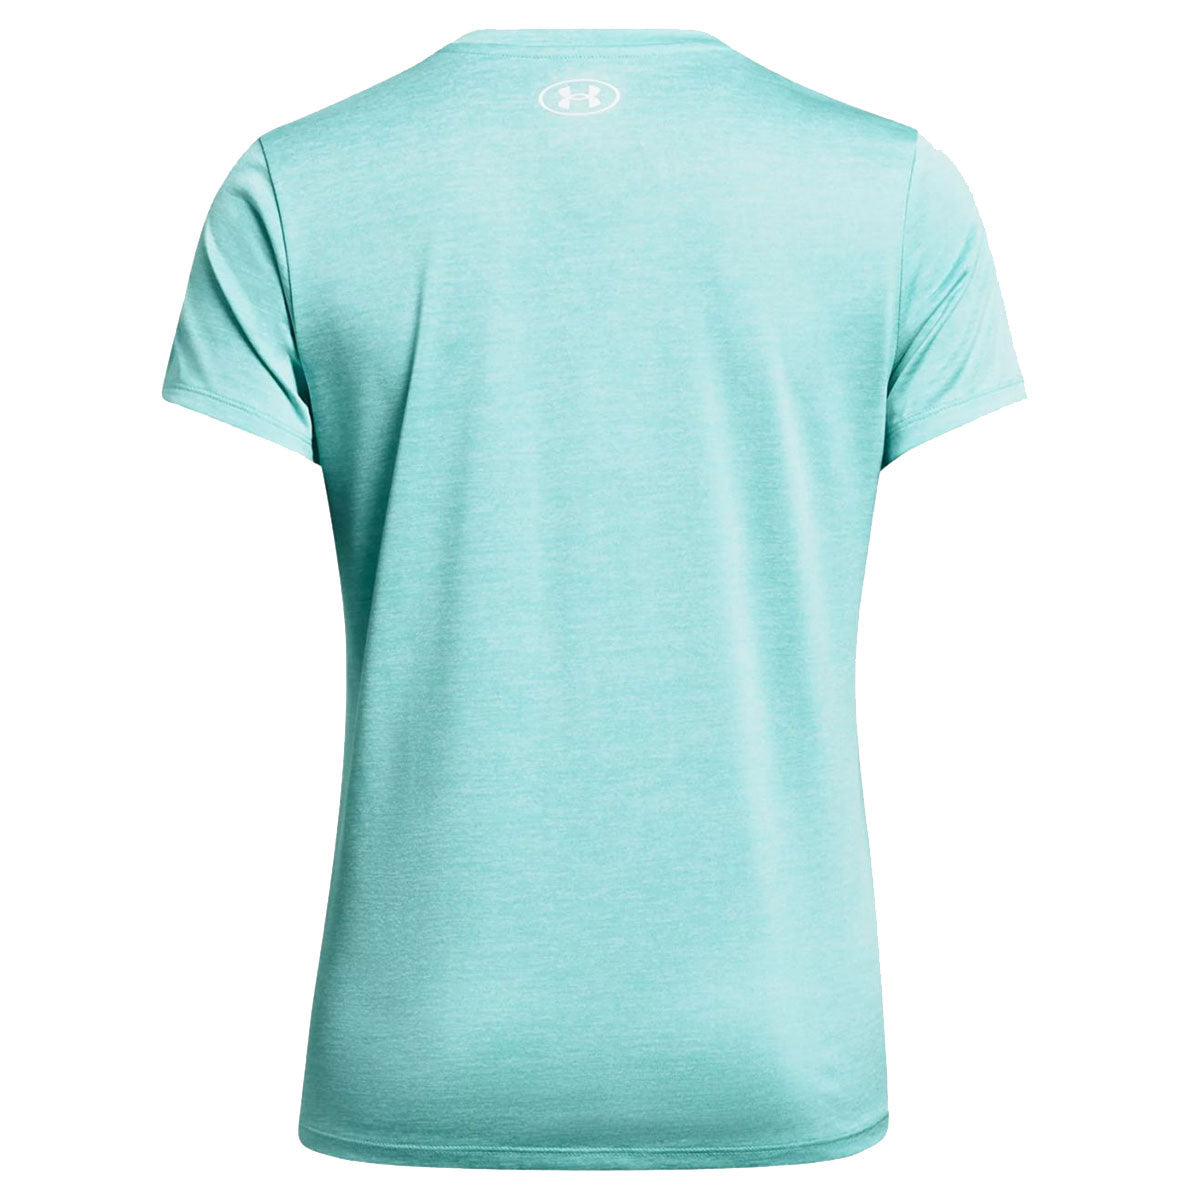 Under Armour Tech Twist V-Neck Short Sleeve Tee - Womens - Radial Turquoise/White